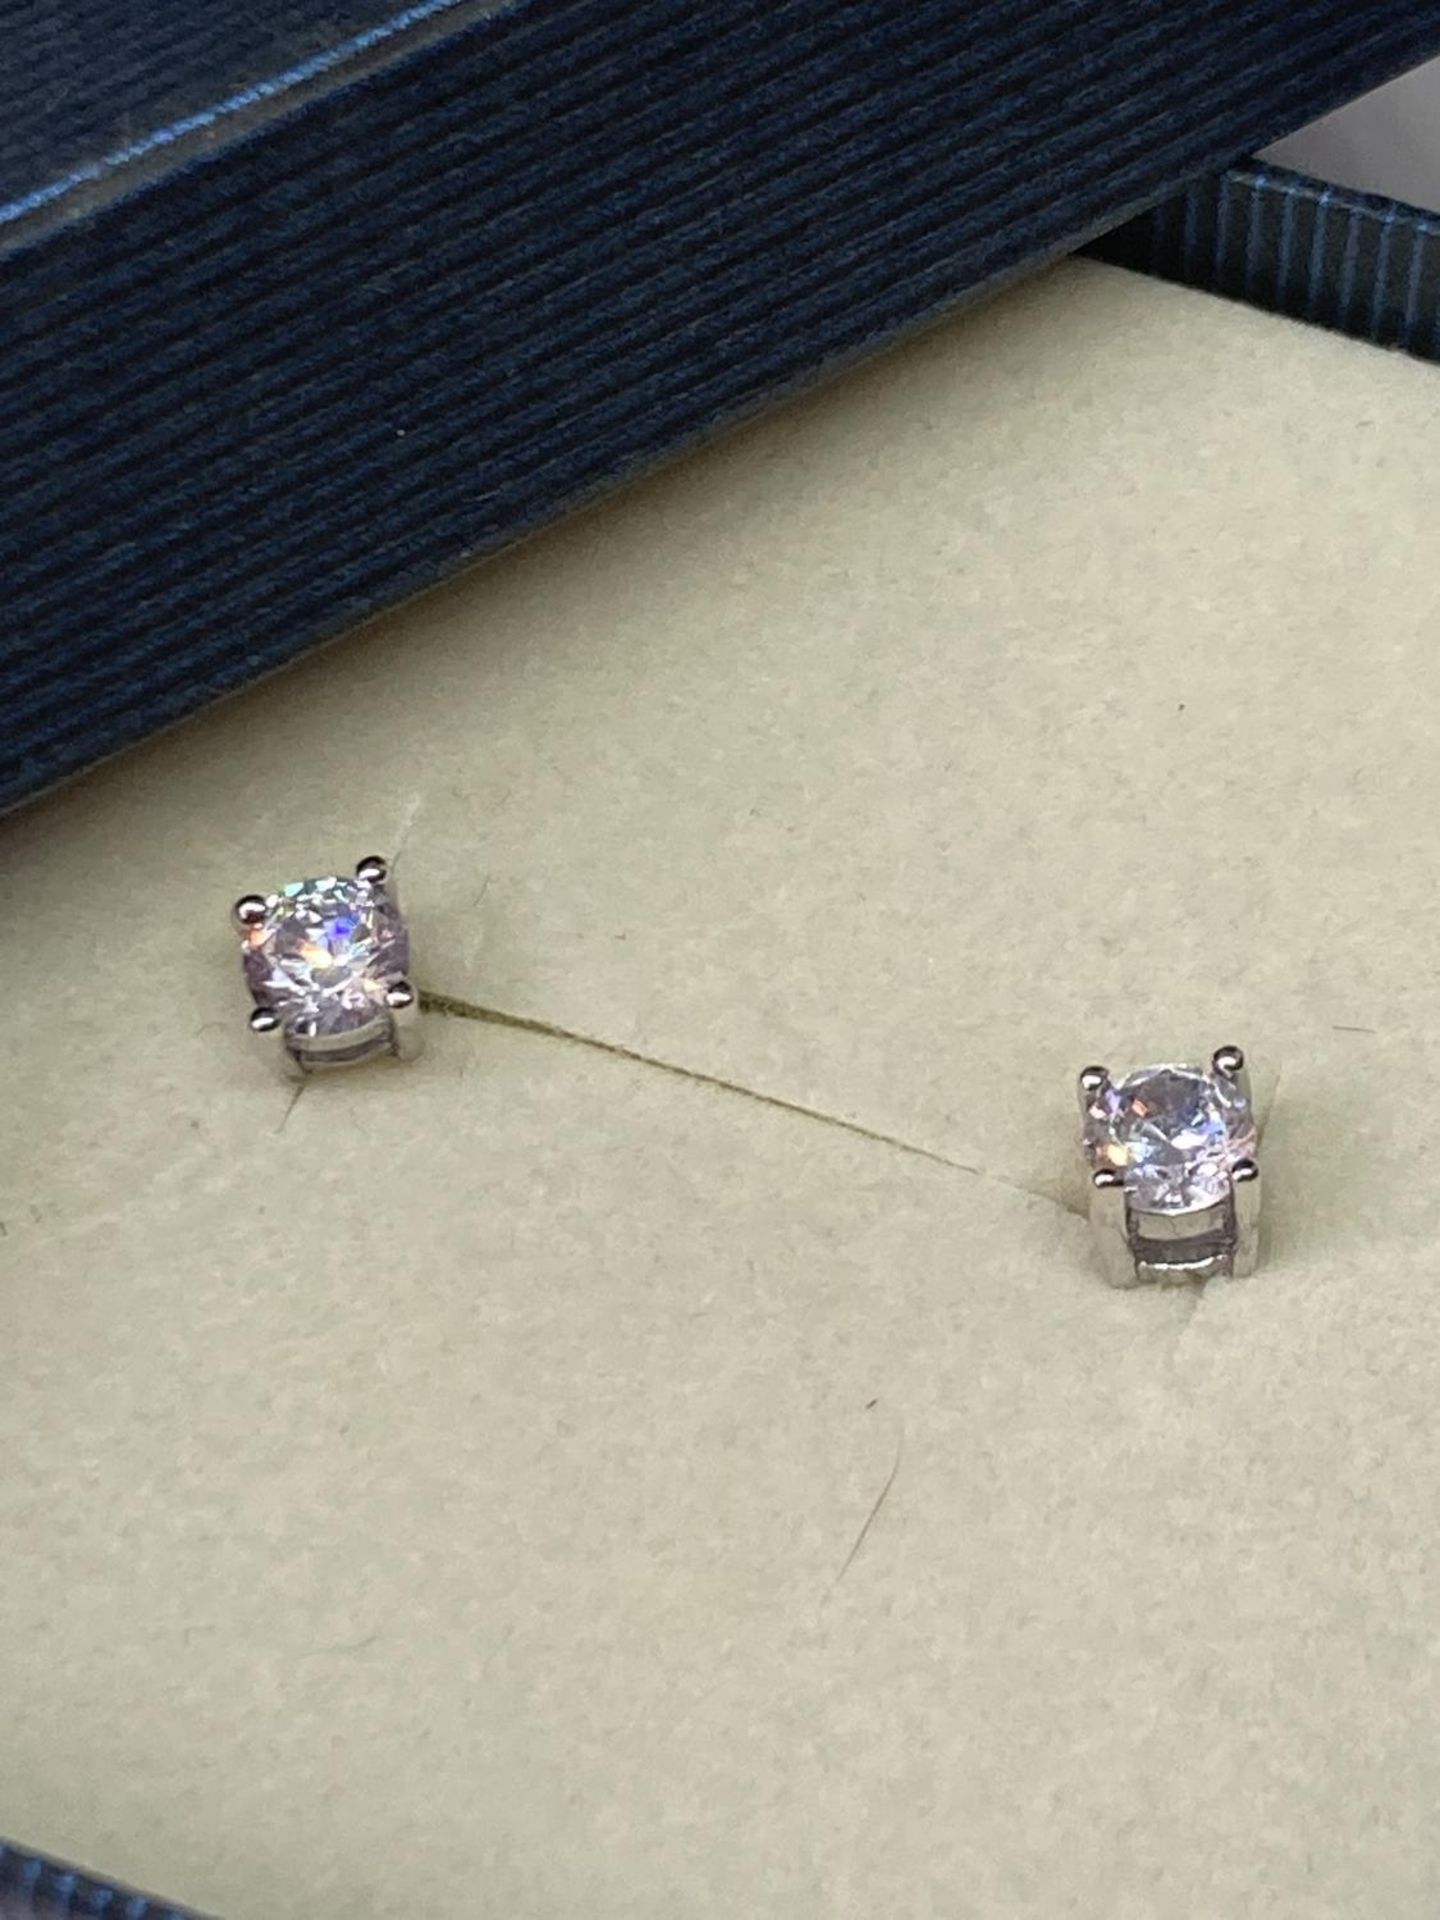 A PAIR OF MARKED 925 SILVER EARRINGS WITH CLEAR STONES IN A PRESENTATION BOX - Image 3 of 8